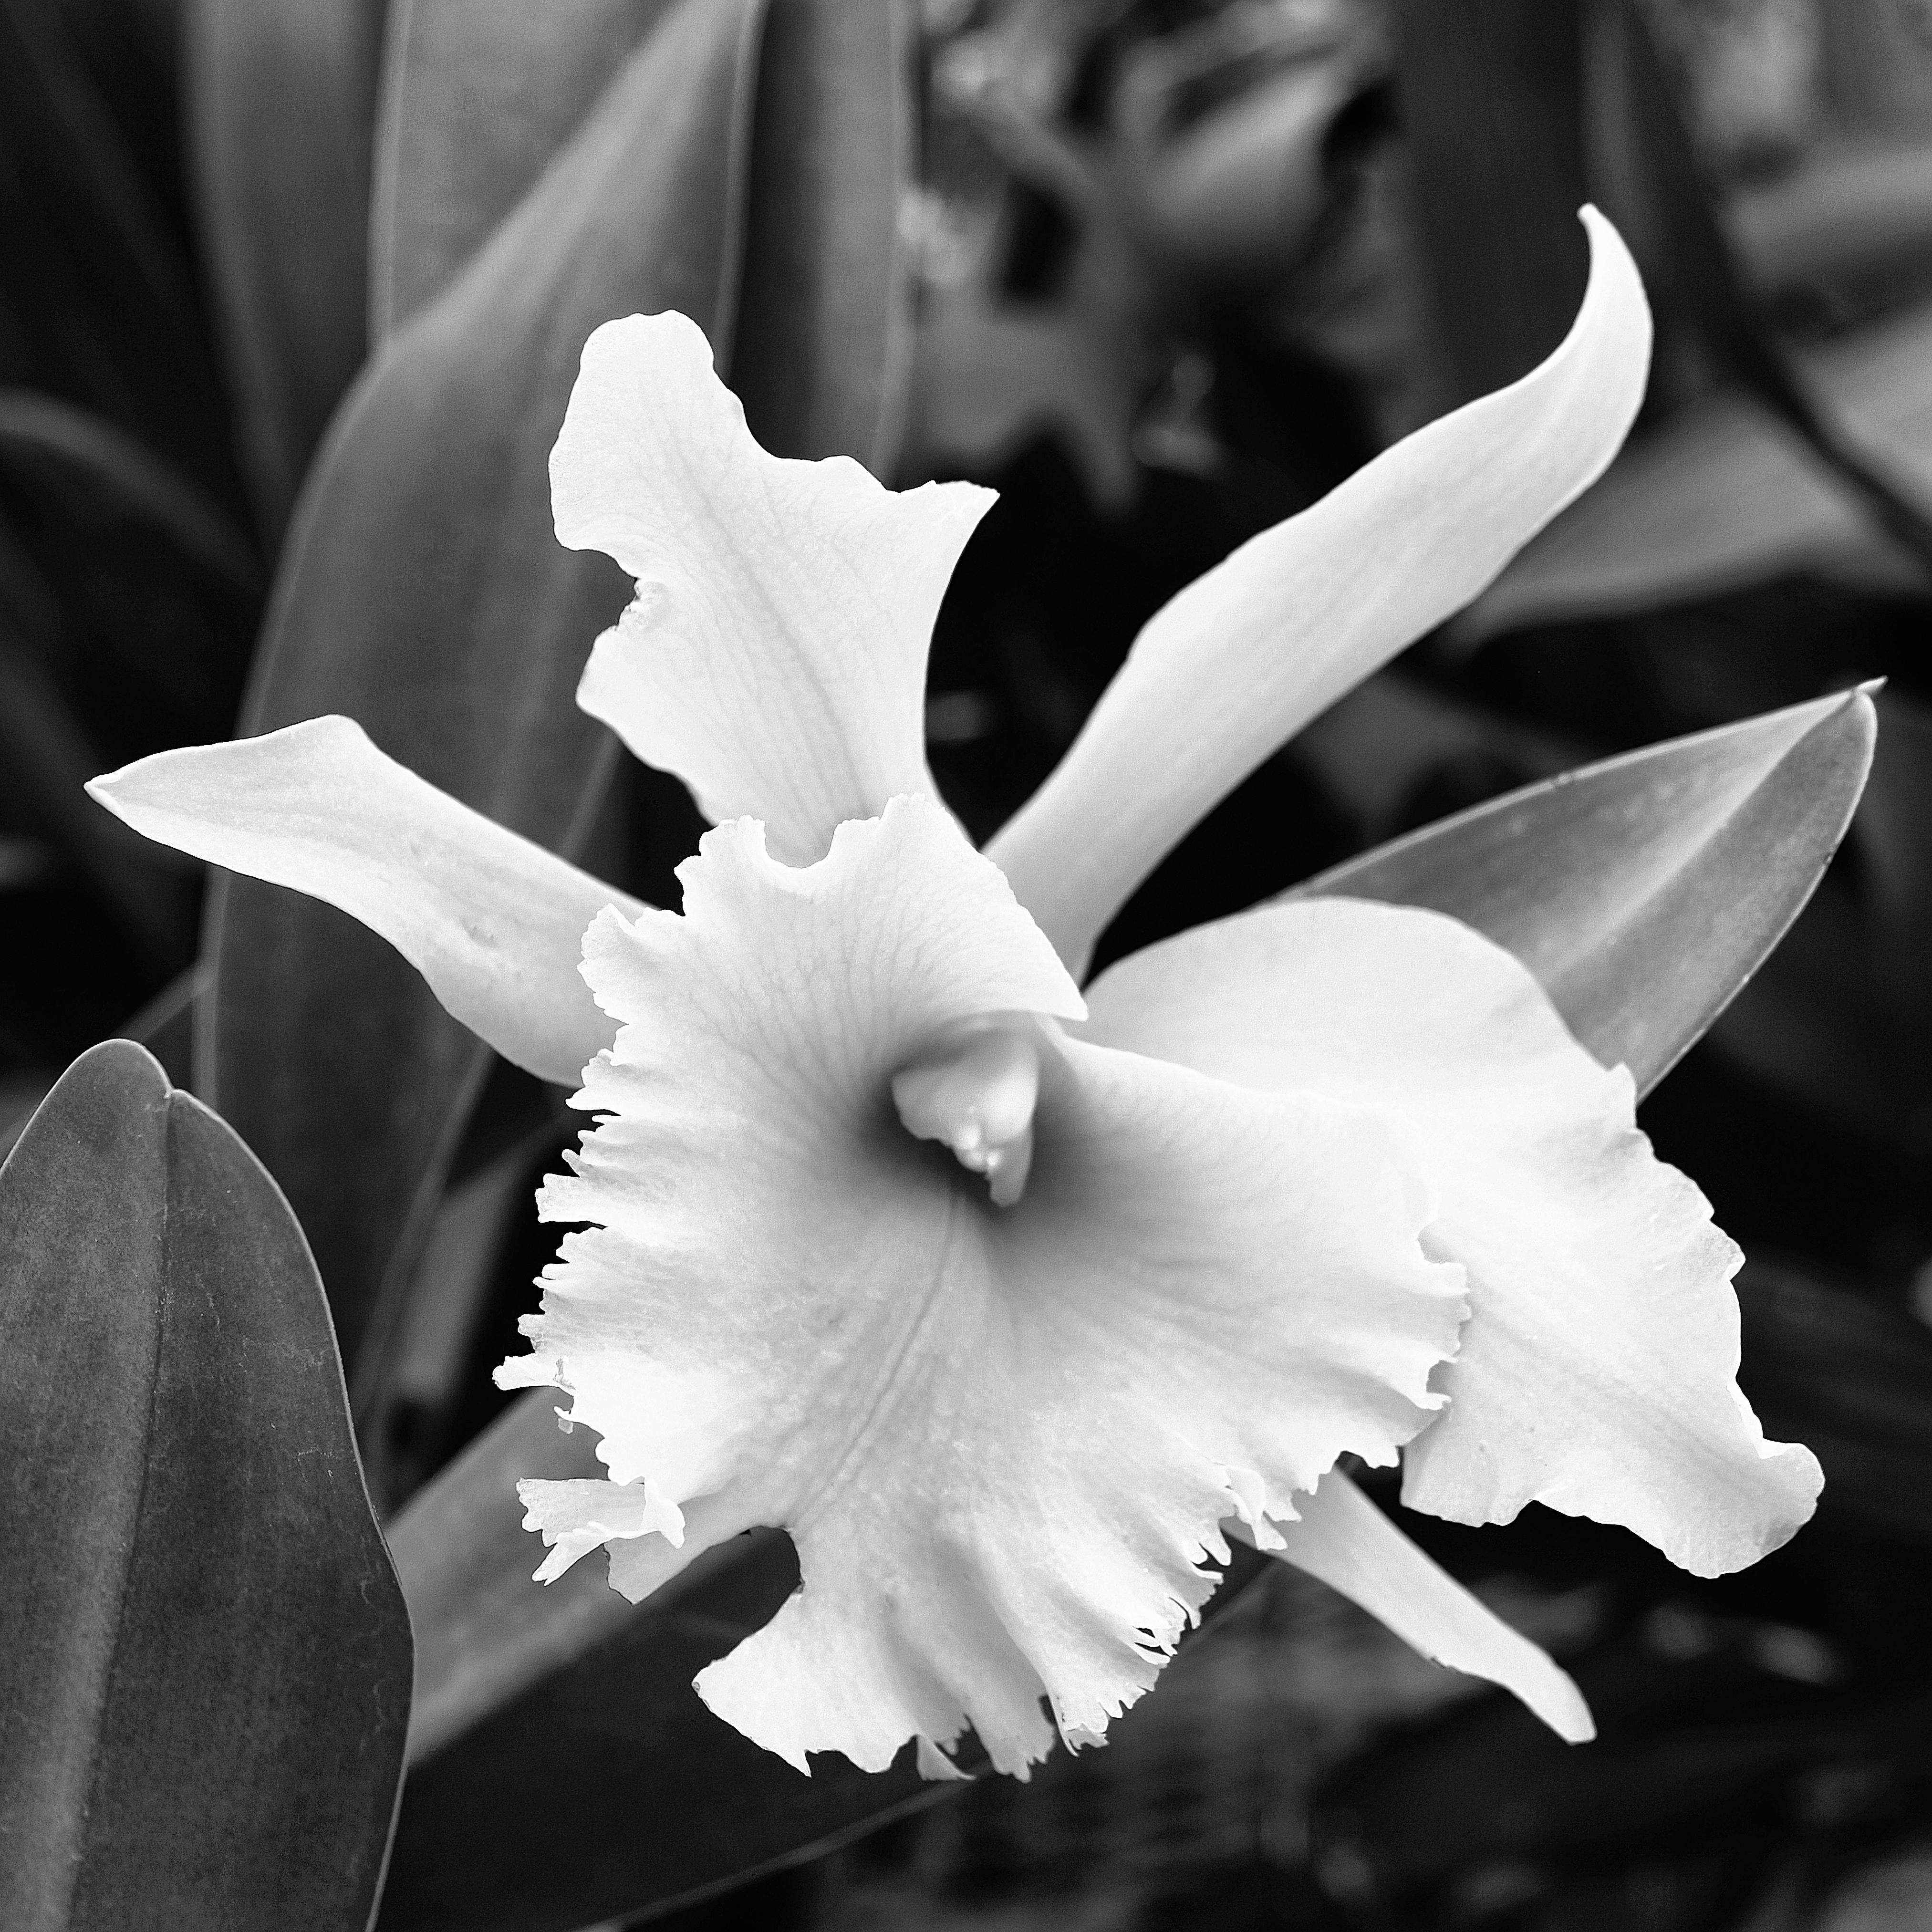 William Dey Black and White Photograph - DOVE ORCHID Palm Springs, Photograph, Archival Ink Jet